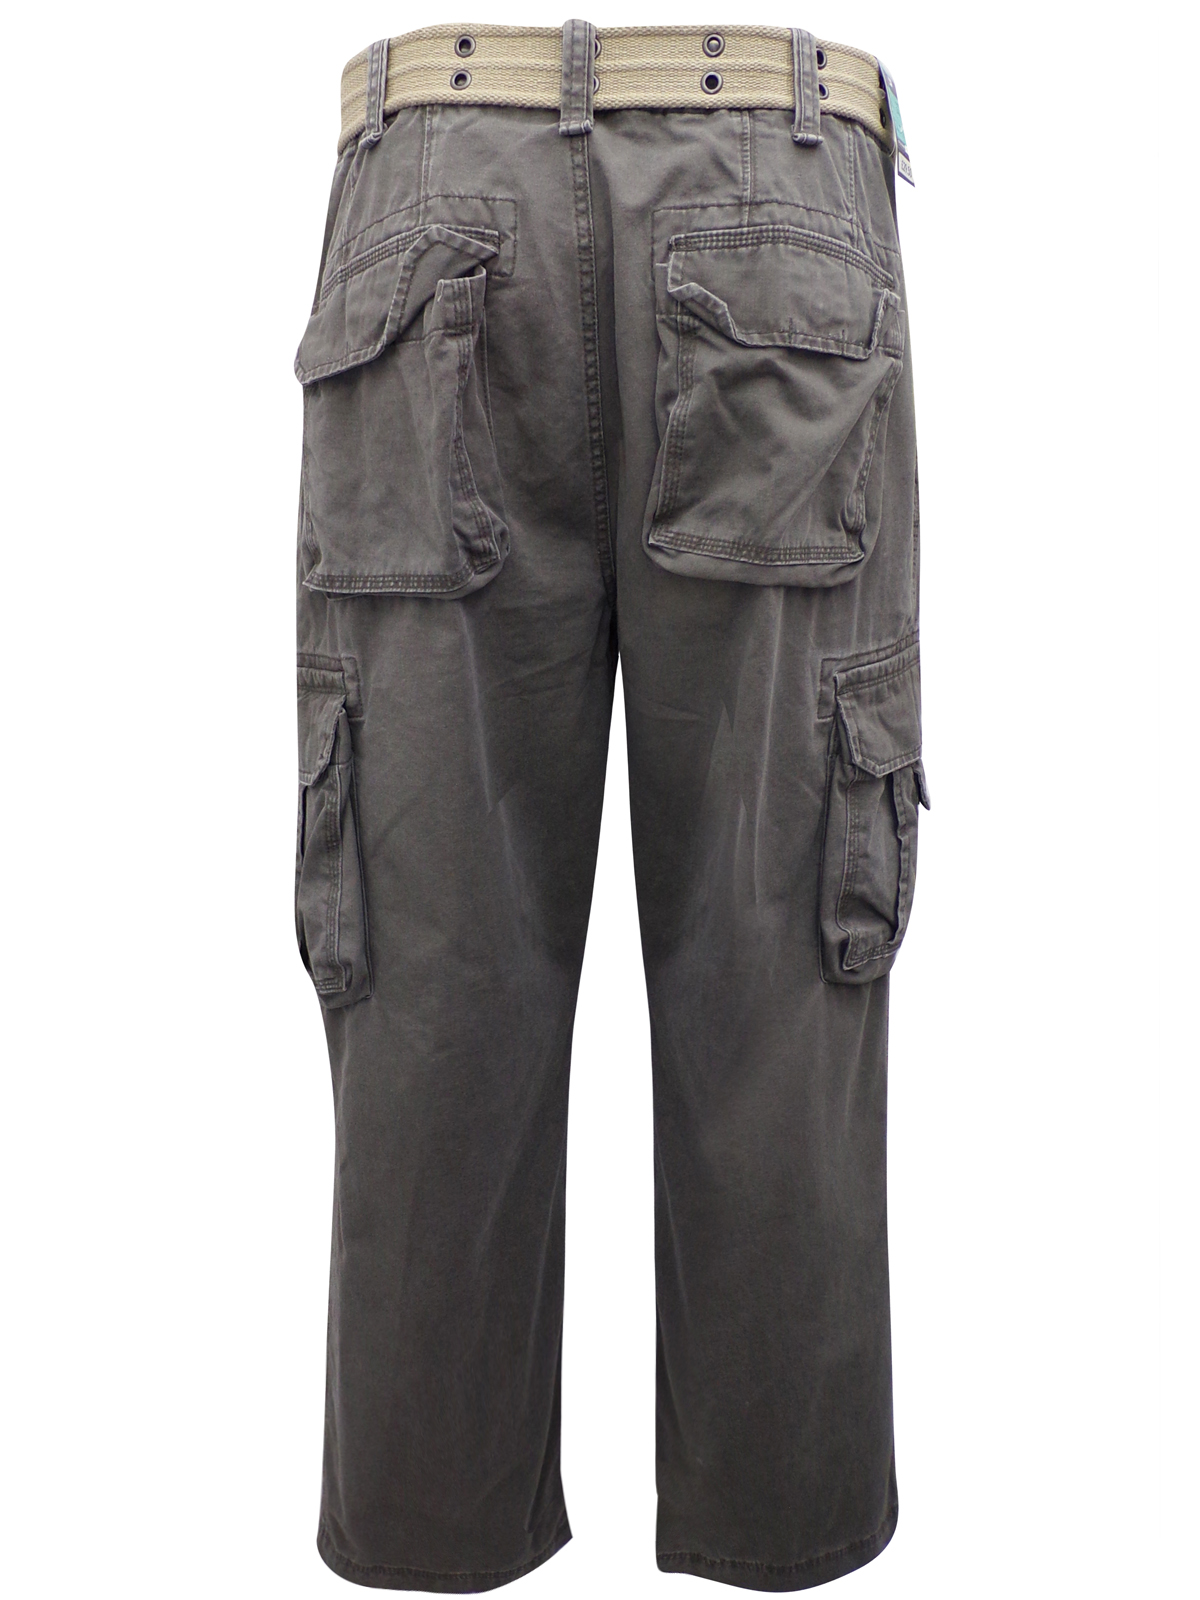 Marks and Spencer - - M&5 GREY Pure Cotton Utility Cargo Trousers with ...